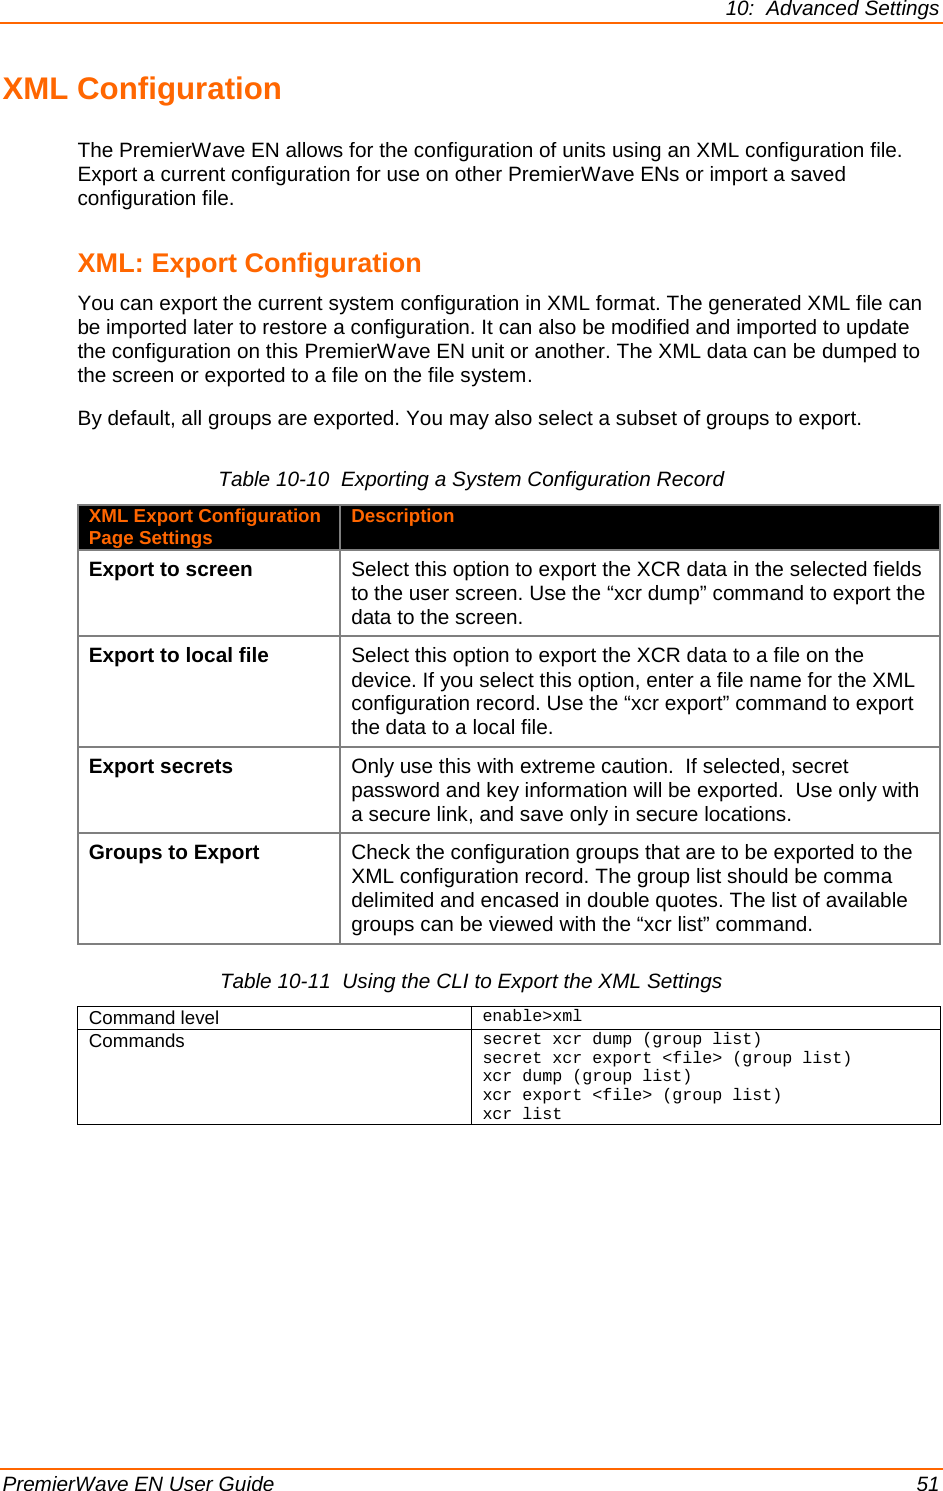 10:  Advanced Settings PremierWave EN User Guide    51 XML Configuration The PremierWave EN allows for the configuration of units using an XML configuration file. Export a current configuration for use on other PremierWave ENs or import a saved configuration file.  XML: Export Configuration You can export the current system configuration in XML format. The generated XML file can be imported later to restore a configuration. It can also be modified and imported to update the configuration on this PremierWave EN unit or another. The XML data can be dumped to the screen or exported to a file on the file system. By default, all groups are exported. You may also select a subset of groups to export. Table 10-10  Exporting a System Configuration Record XML Export Configuration Page Settings Description Export to screen Select this option to export the XCR data in the selected fields to the user screen. Use the “xcr dump” command to export the data to the screen. Export to local file  Select this option to export the XCR data to a file on the device. If you select this option, enter a file name for the XML configuration record. Use the “xcr export” command to export the data to a local file. Export secrets Only use this with extreme caution.  If selected, secret password and key information will be exported.  Use only with a secure link, and save only in secure locations. Groups to Export Check the configuration groups that are to be exported to the XML configuration record. The group list should be comma delimited and encased in double quotes. The list of available groups can be viewed with the “xcr list” command. Table 10-11  Using the CLI to Export the XML Settings Command level enable&gt;xml Commands  secret xcr dump (group list) secret xcr export &lt;file&gt; (group list) xcr dump (group list) xcr export &lt;file&gt; (group list) xcr list  